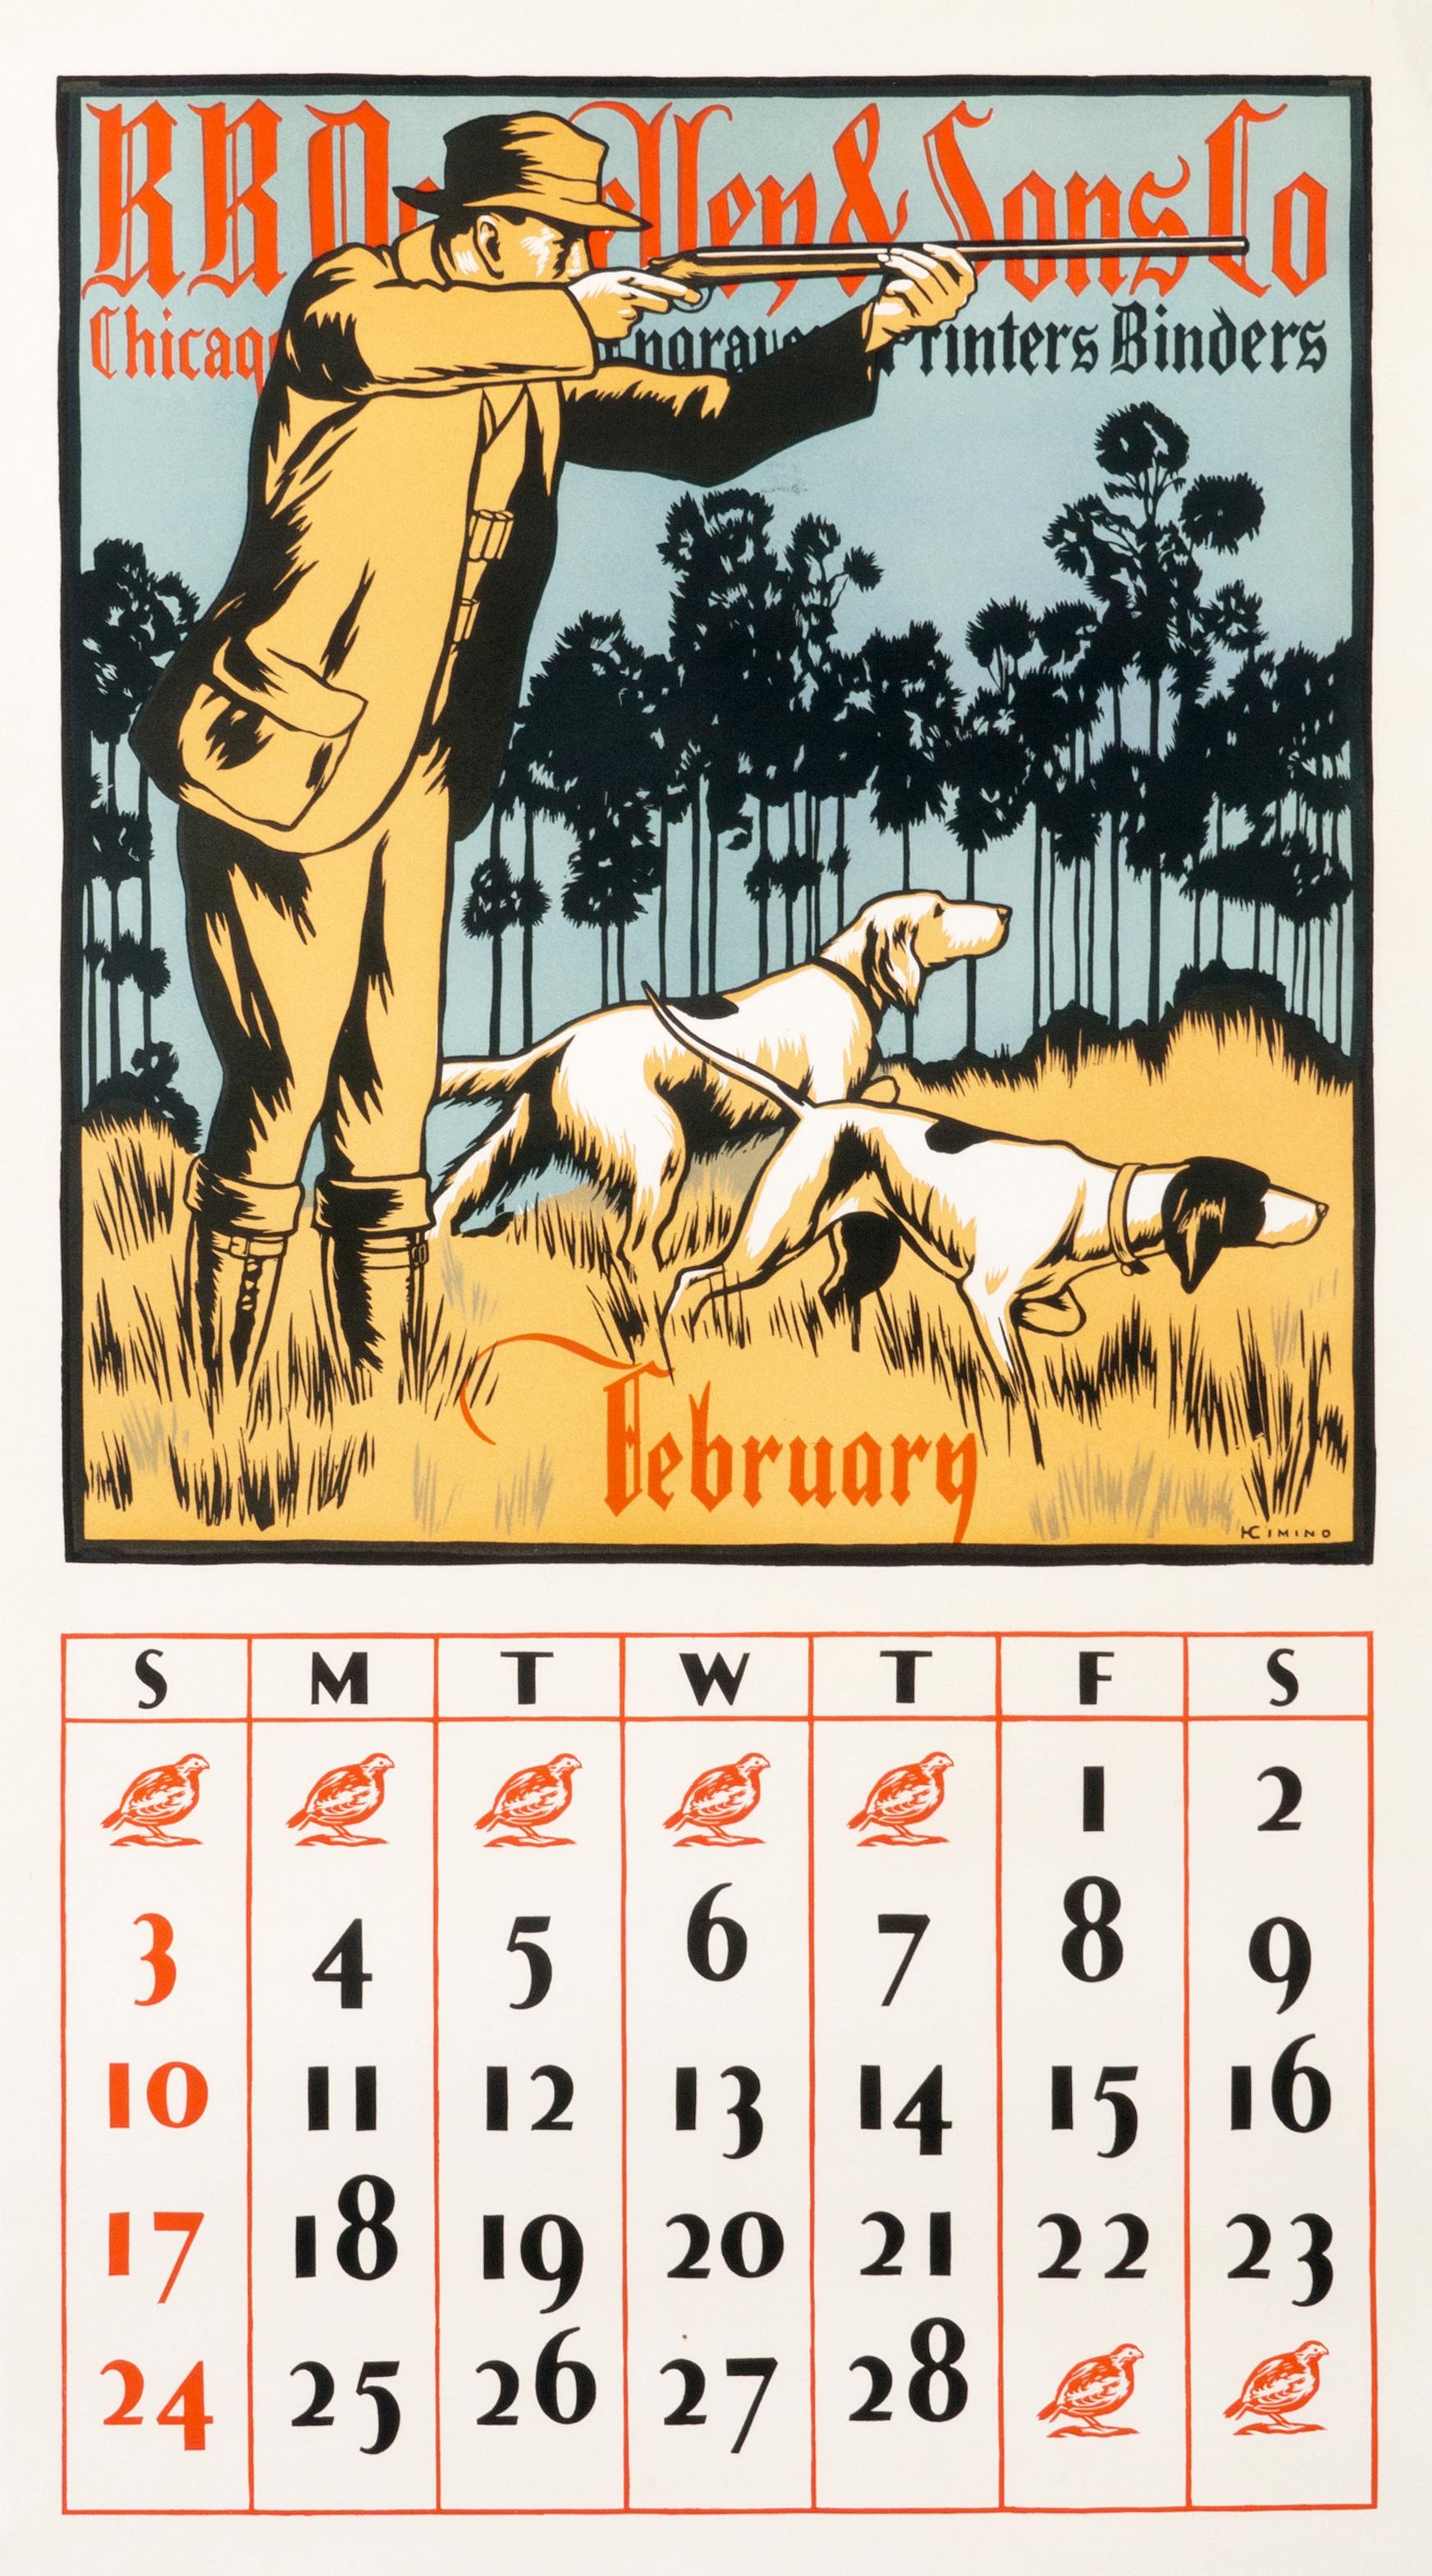 "RR Donnelley & Sons Co. - February" Original Vintage Calendar Page - Print by Harry Cimino